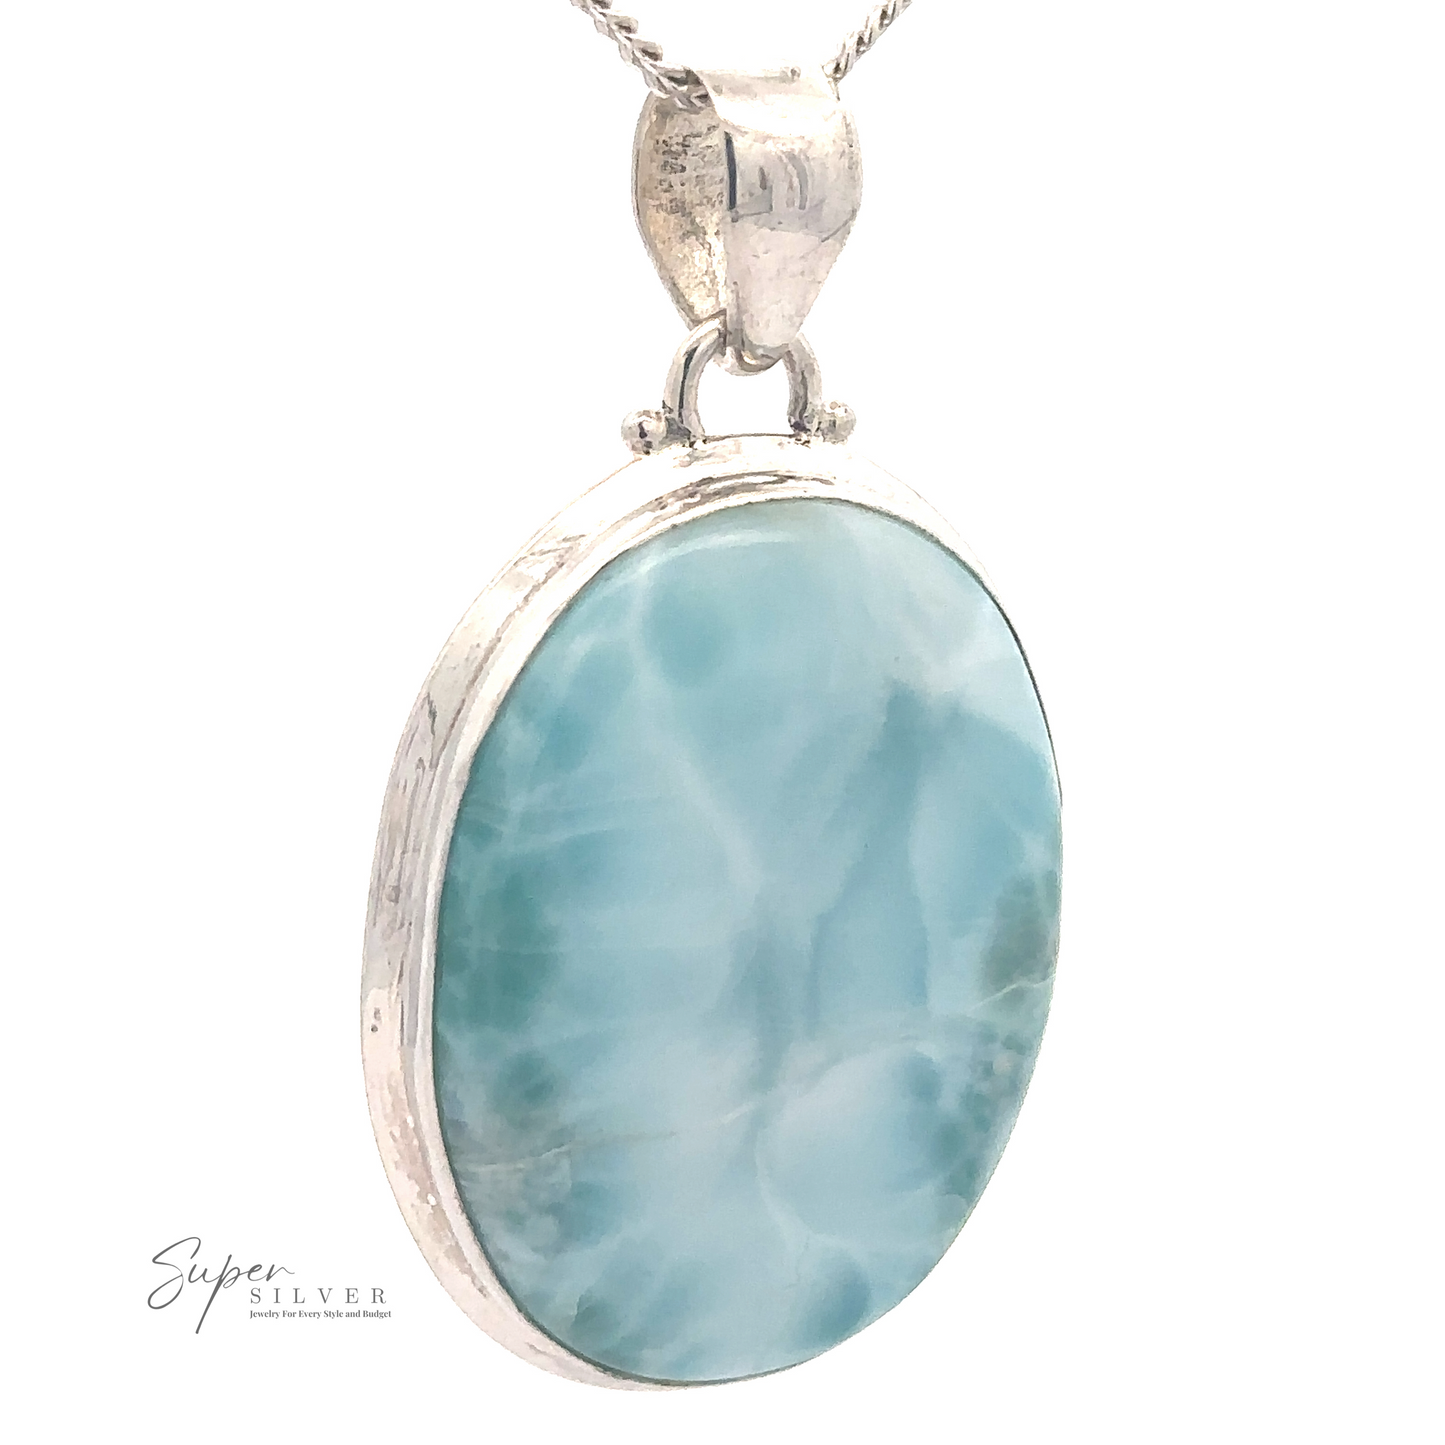 
                  
                    A Simple Oval Larimar Pendant featuring an oval-shaped larimar stone set in a silver bezel, suspended from a silver chain. The stone exhibits a soft blue color with natural white marbling. Perfect as an everyday wear pendant. Text reads "Super Silver.
                  
                